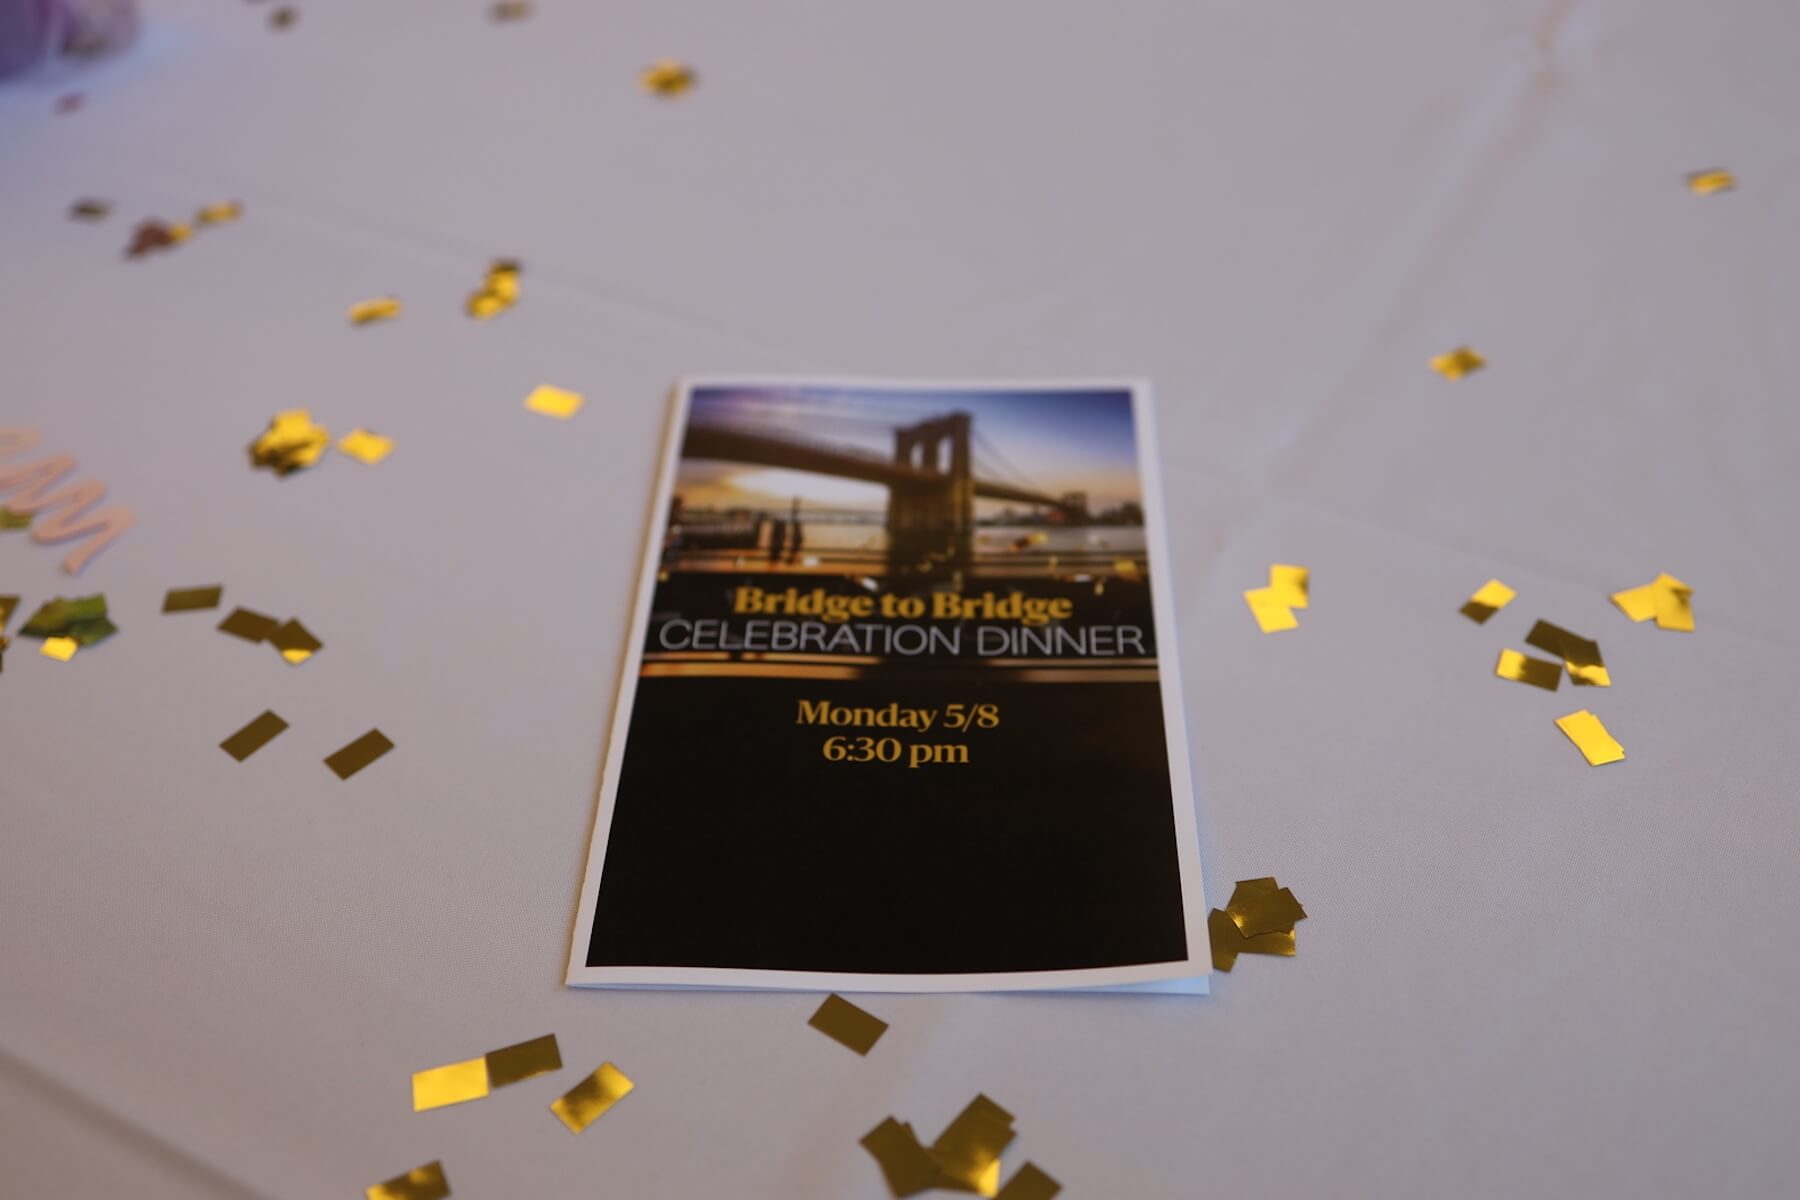 Photo of event program on table surrounded by gold confetti